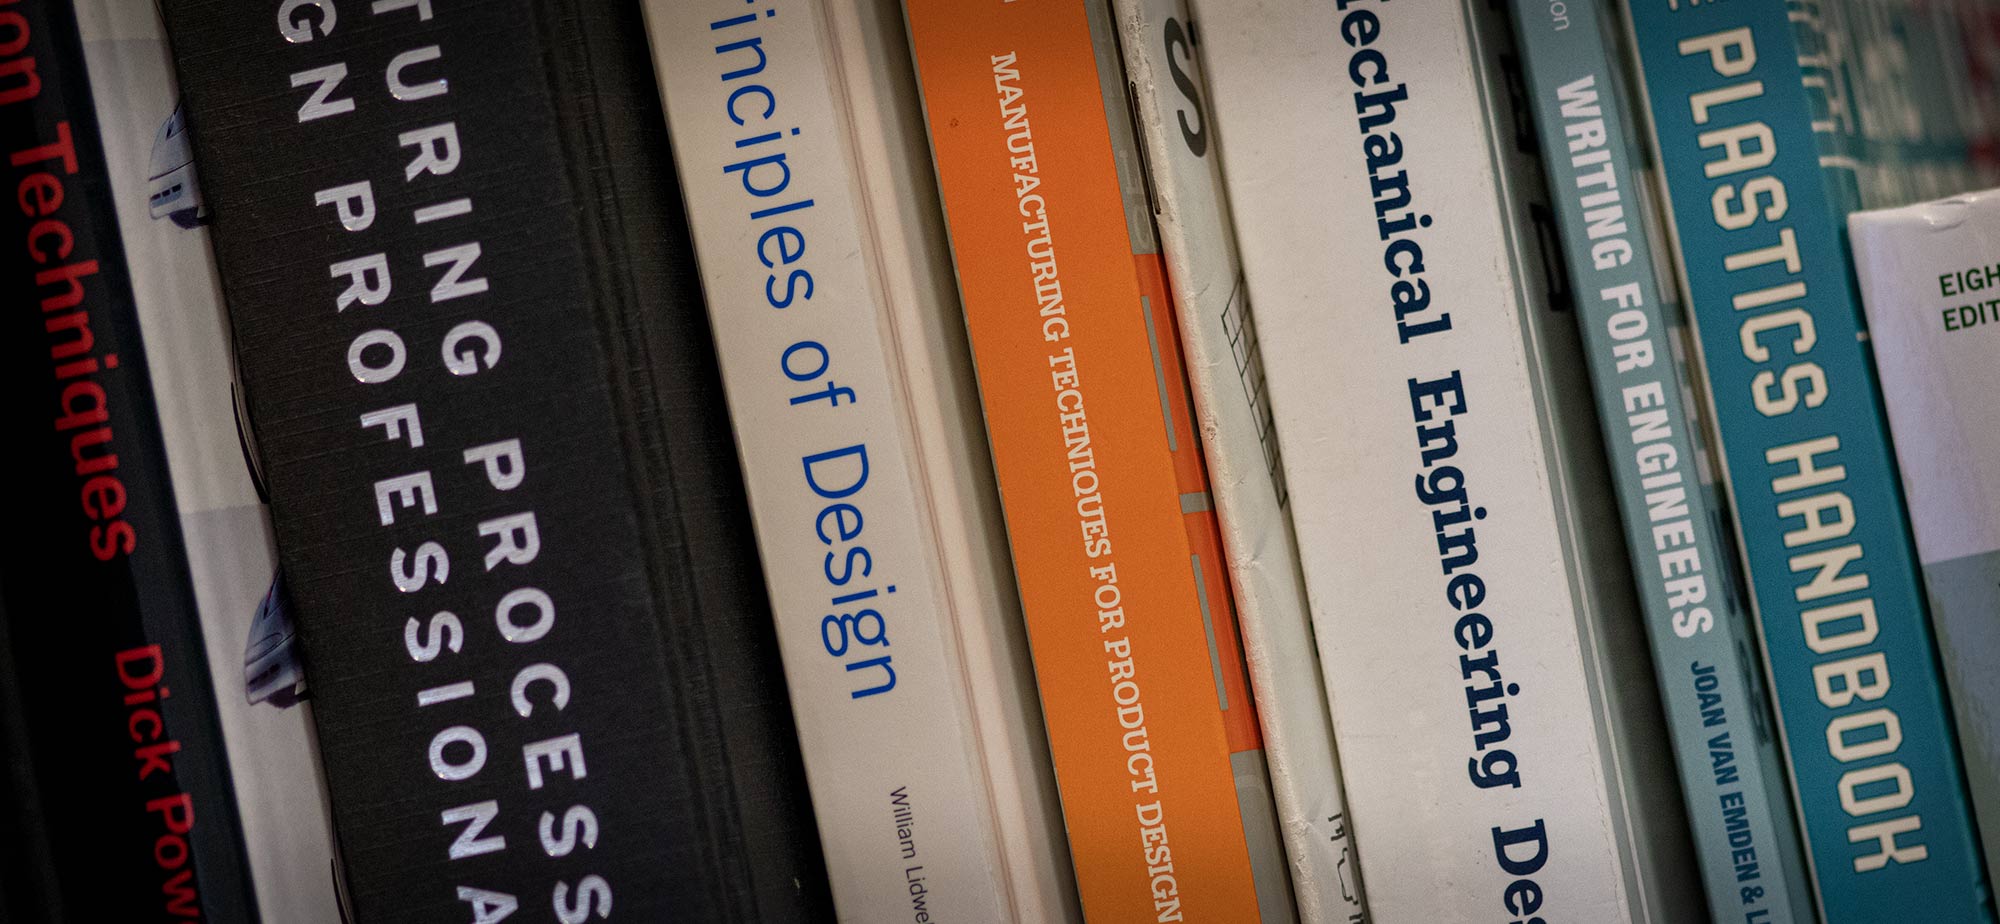 Engineering and Product Design Books